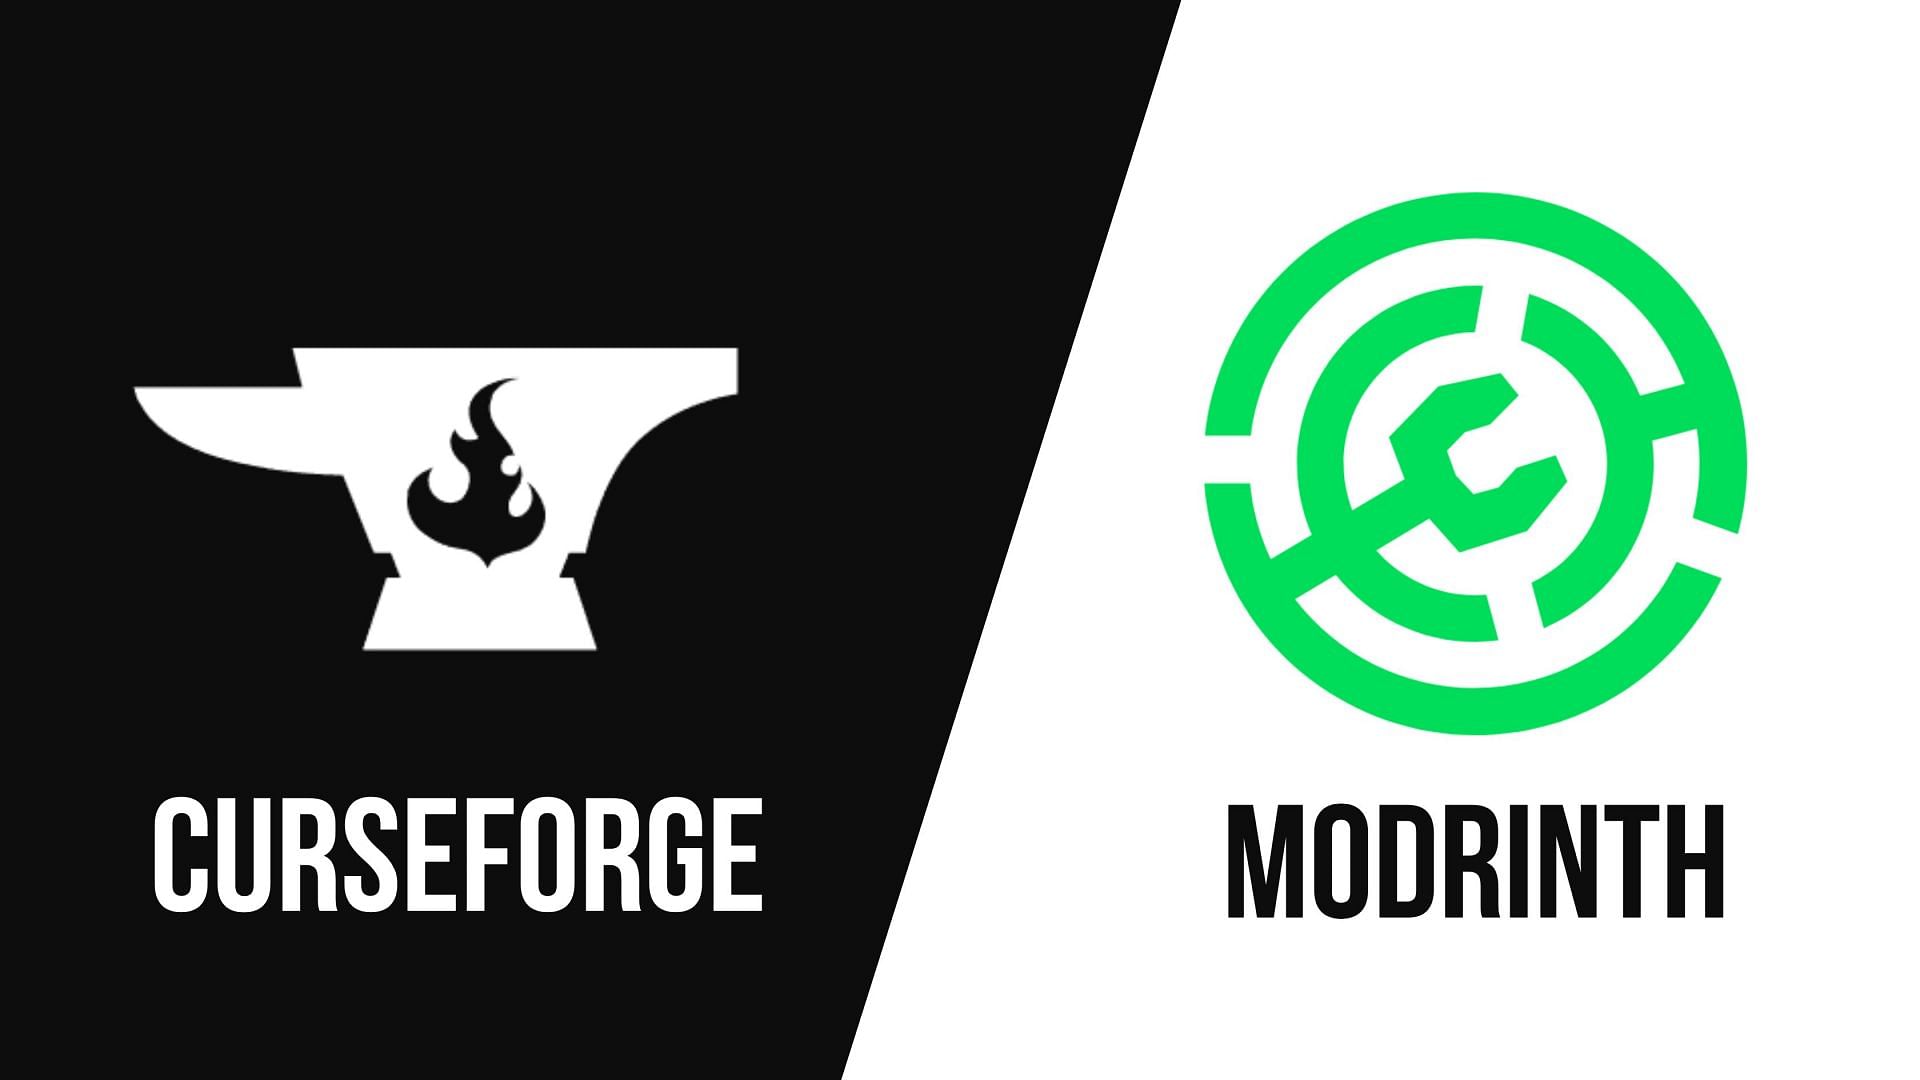 Modrinth vs Curseforge: Which is better for Minecraft mods? (Image via curseforge.com and modrinth.com)